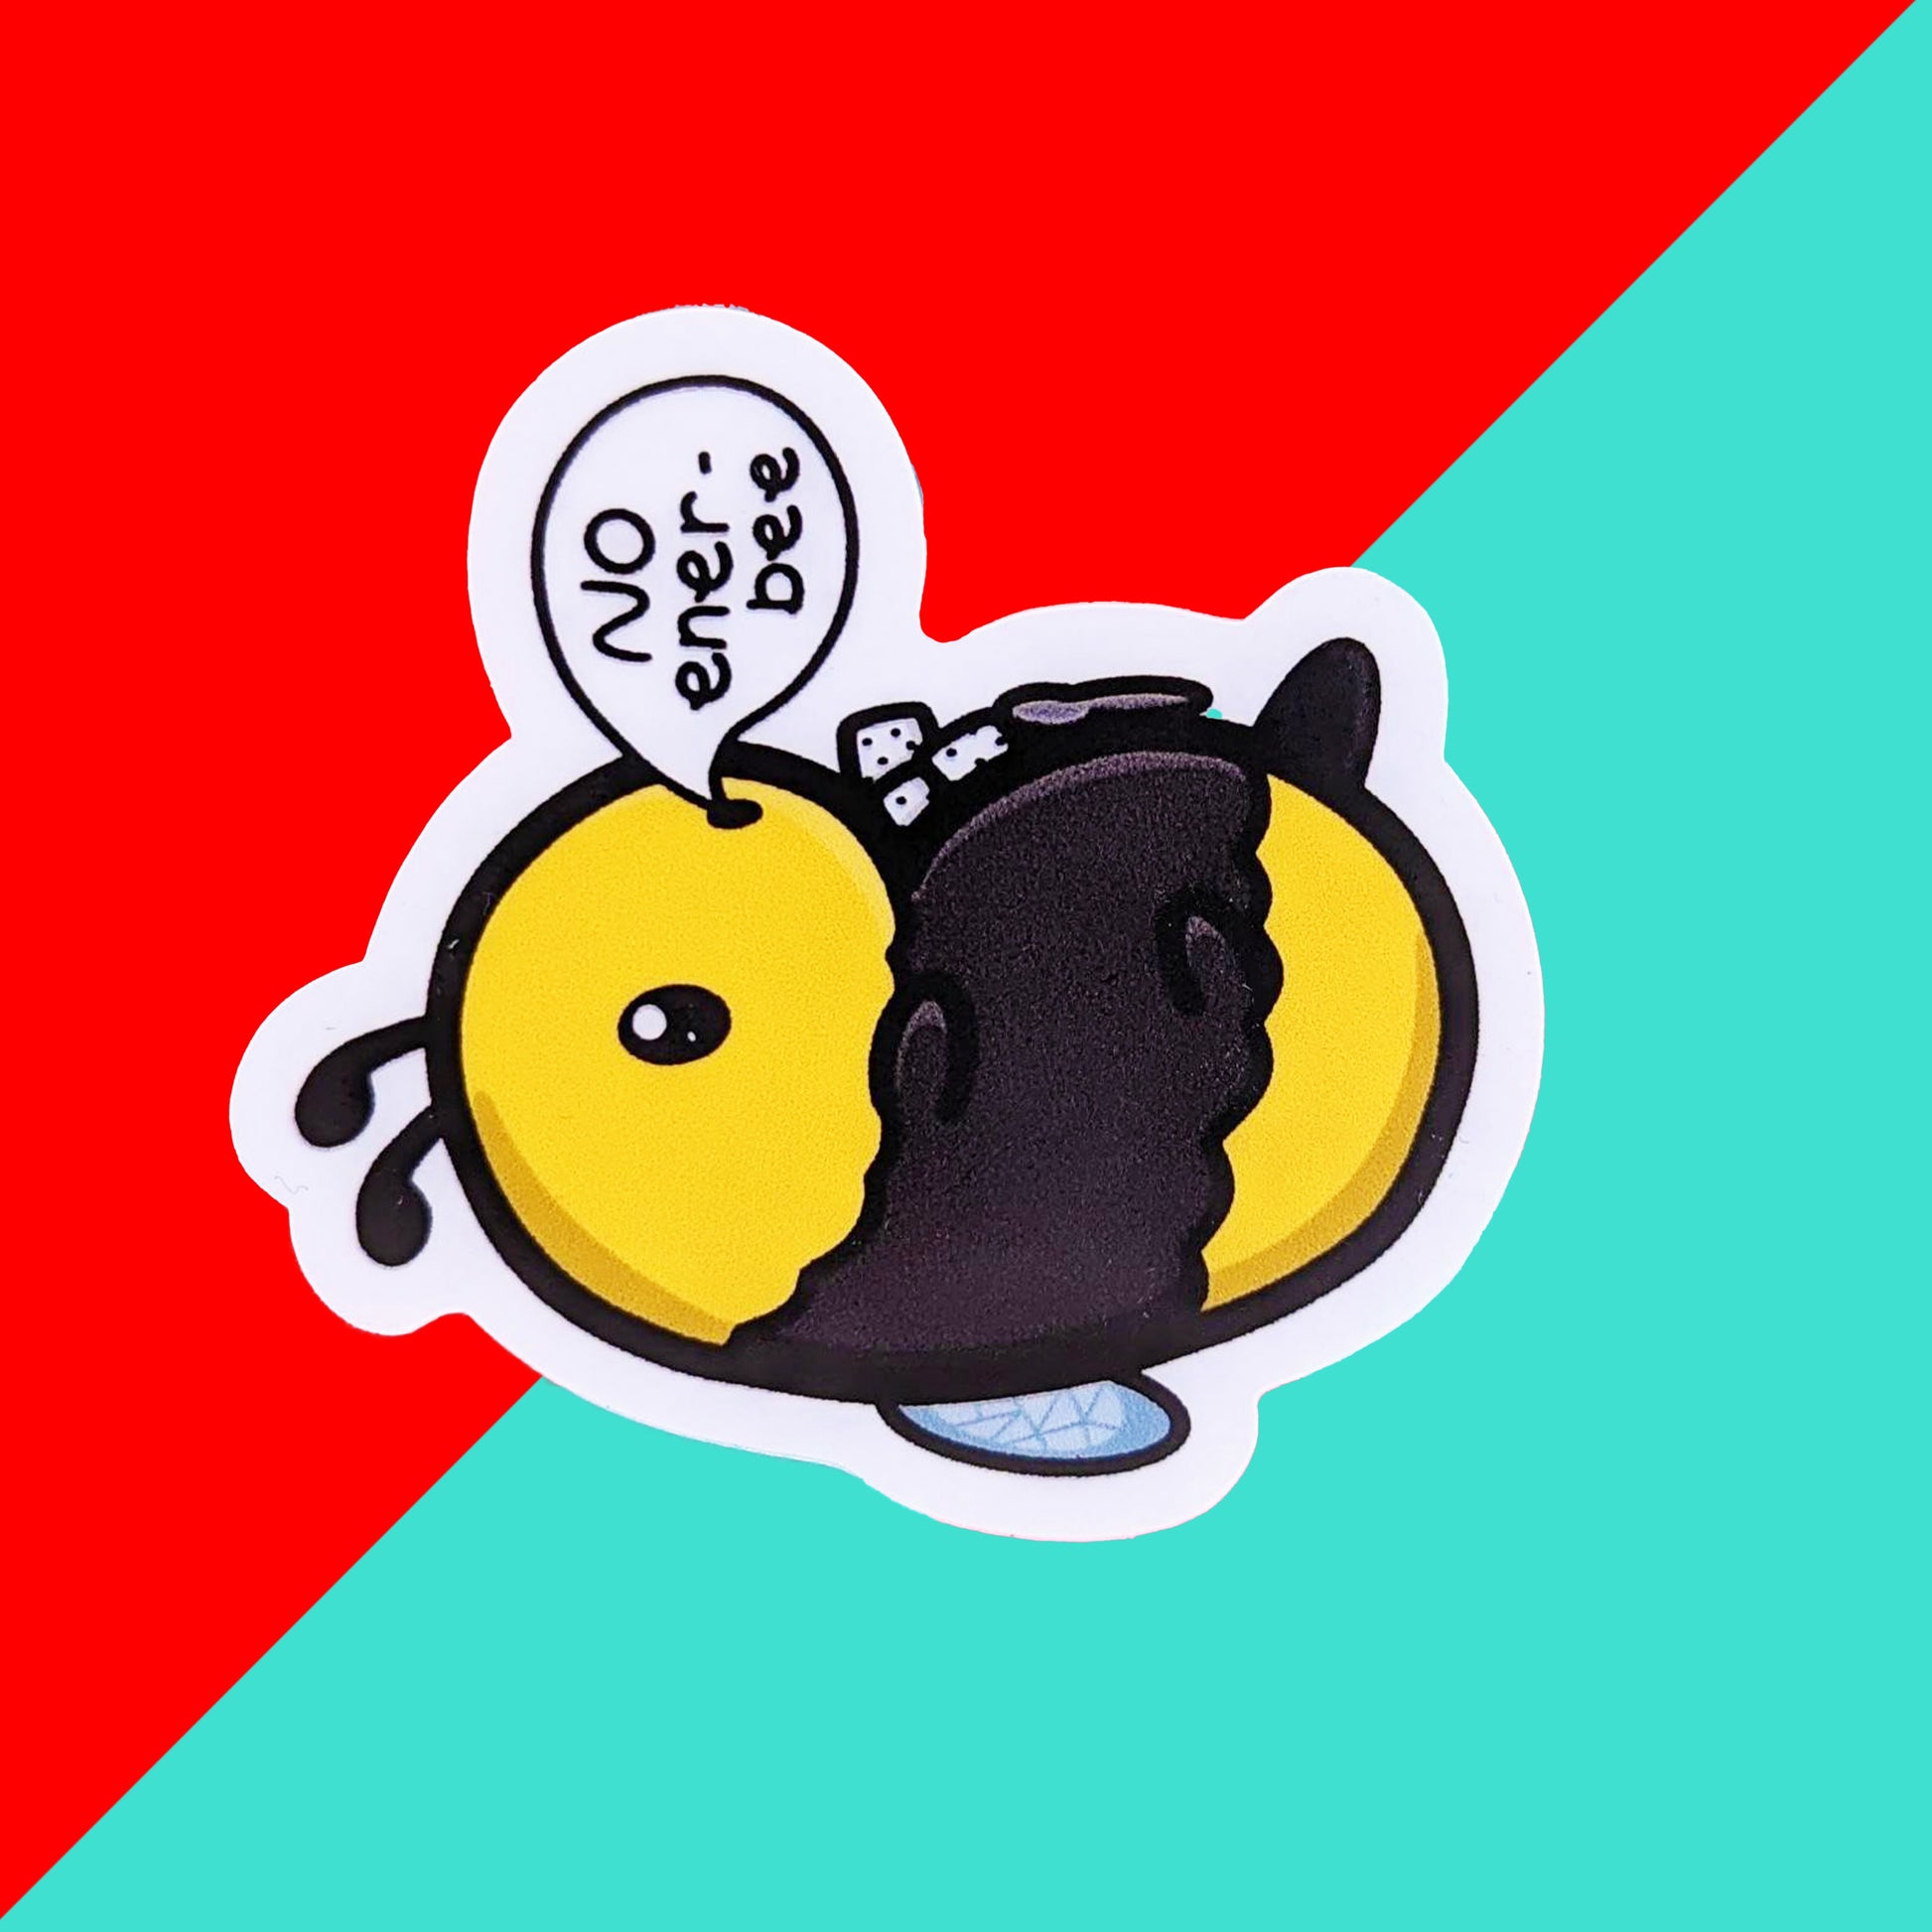 The low energy bee sticker shown on a blue and red checkered background. The sticker is a cute yellow and black bee lying on it's wings with its arms, legs, little belly and stinger in the air. The bee has a speech bubble coming from it's mouth with 'NO ener-bee' written inside in black writing.